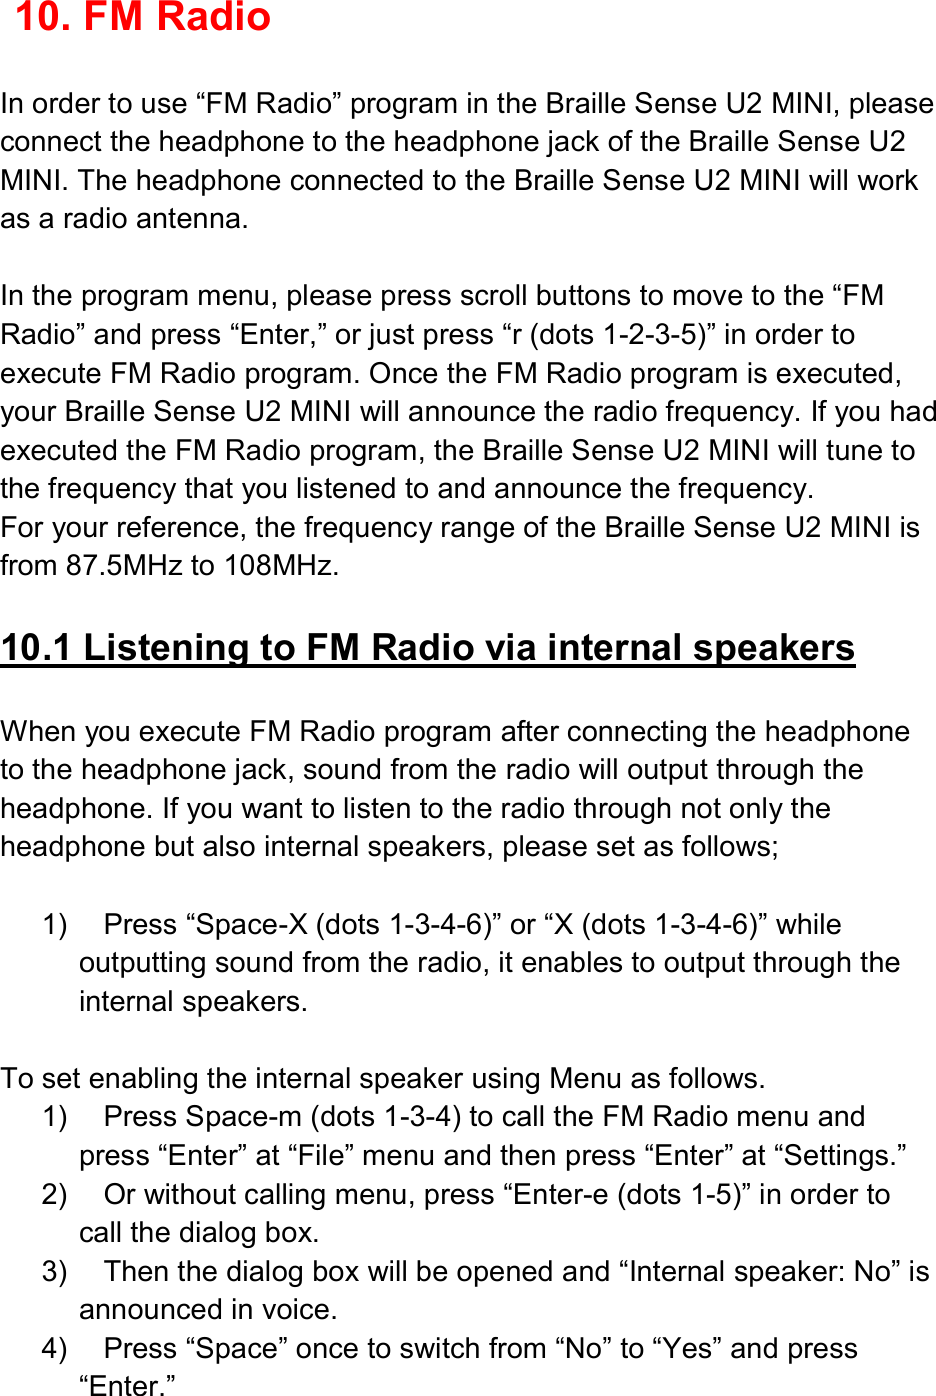  10. FM Radio  In order to use “FM Radio” program in the Braille Sense U2 MINI, please connect the headphone to the headphone jack of the Braille Sense U2 MINI. The headphone connected to the Braille Sense U2 MINI will work as a radio antenna.  In the program menu, please press scroll buttons to move to the “FM Radio” and press “Enter,” or just press “r (dots 1-2-3-5)” in order to execute FM Radio program. Once the FM Radio program is executed, your Braille Sense U2 MINI will announce the radio frequency. If you had executed the FM Radio program, the Braille Sense U2 MINI will tune to the frequency that you listened to and announce the frequency.   For your reference, the frequency range of the Braille Sense U2 MINI is from 87.5MHz to 108MHz.  10.1 Listening to FM Radio via internal speakers  When you execute FM Radio program after connecting the headphone to the headphone jack, sound from the radio will output through the headphone. If you want to listen to the radio through not only the headphone but also internal speakers, please set as follows;  1)  Press “Space-X (dots 1-3-4-6)” or “X (dots 1-3-4-6)” while outputting sound from the radio, it enables to output through the internal speakers.    To set enabling the internal speaker using Menu as follows. 1)  Press Space-m (dots 1-3-4) to call the FM Radio menu and press “Enter” at “File” menu and then press “Enter” at “Settings.” 2)  Or without calling menu, press “Enter-e (dots 1-5)” in order to call the dialog box. 3)  Then the dialog box will be opened and “Internal speaker: No” is announced in voice. 4)  Press “Space” once to switch from “No” to “Yes” and press “Enter.” 